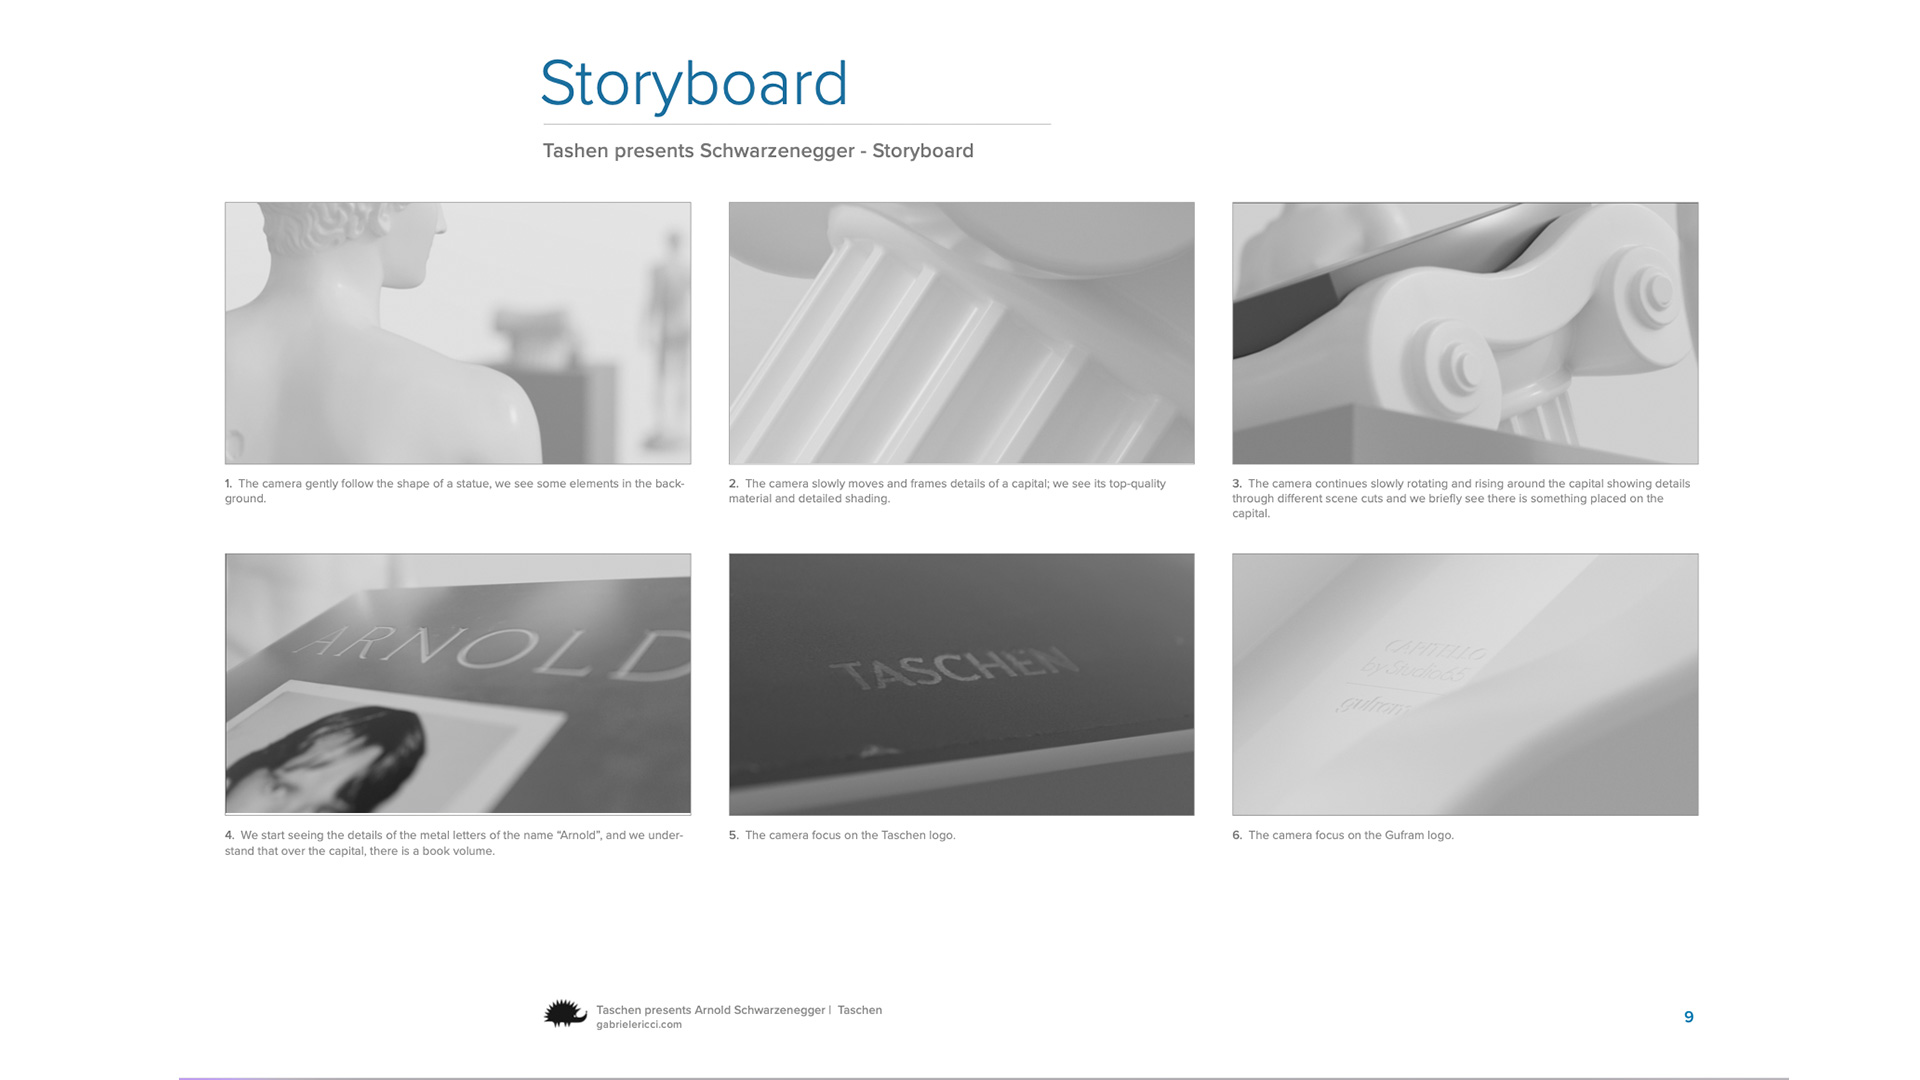 The storyboard of the 3D video